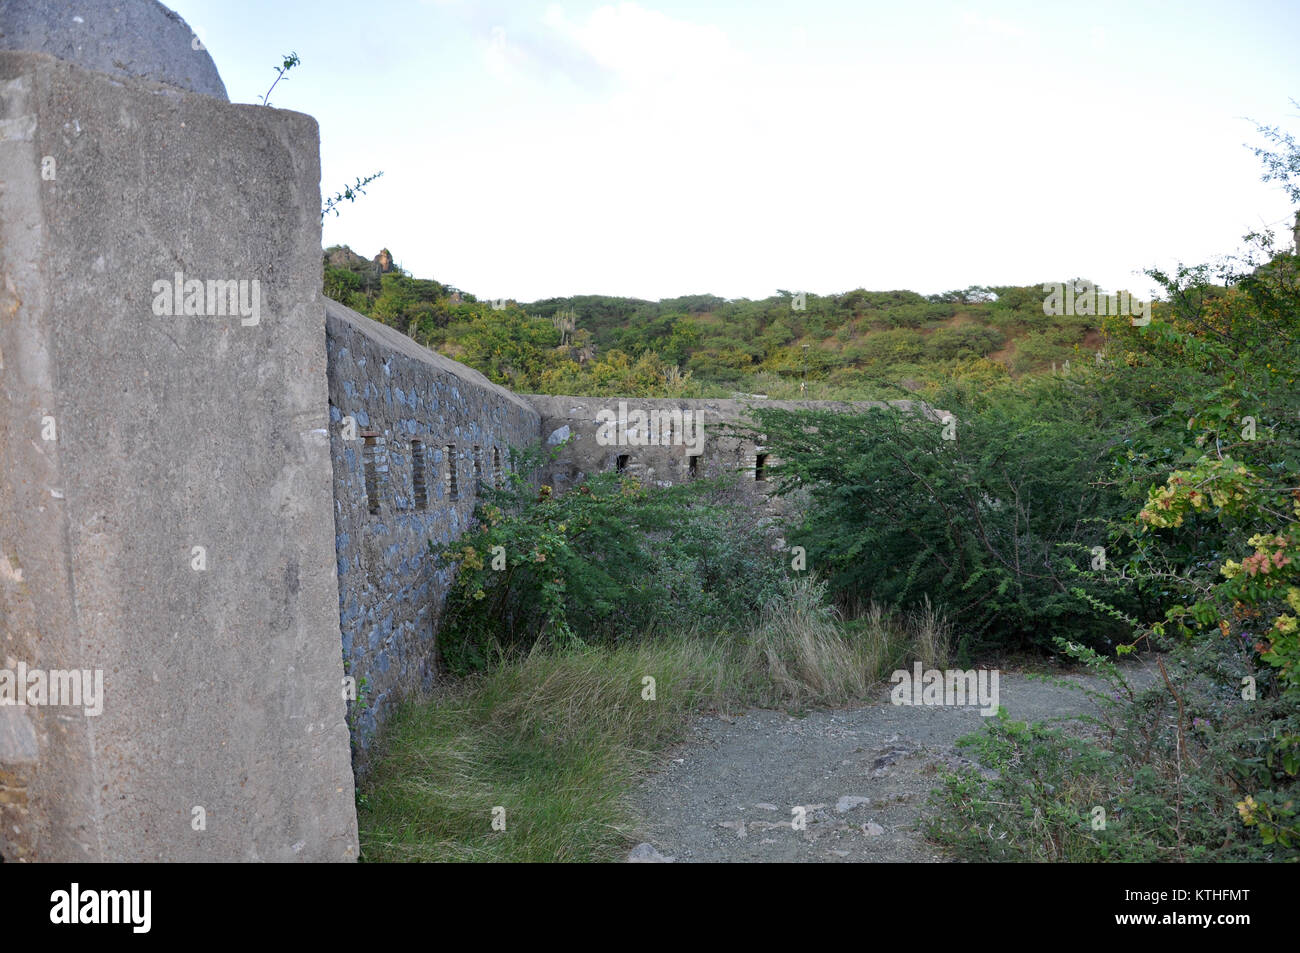 Remains of a wall at Fort Beekenburg, Caracas Bay, Curacao, Netherlands Antilles, West Indies. The fort was built in 1703 and has been used to fight o Stock Photo